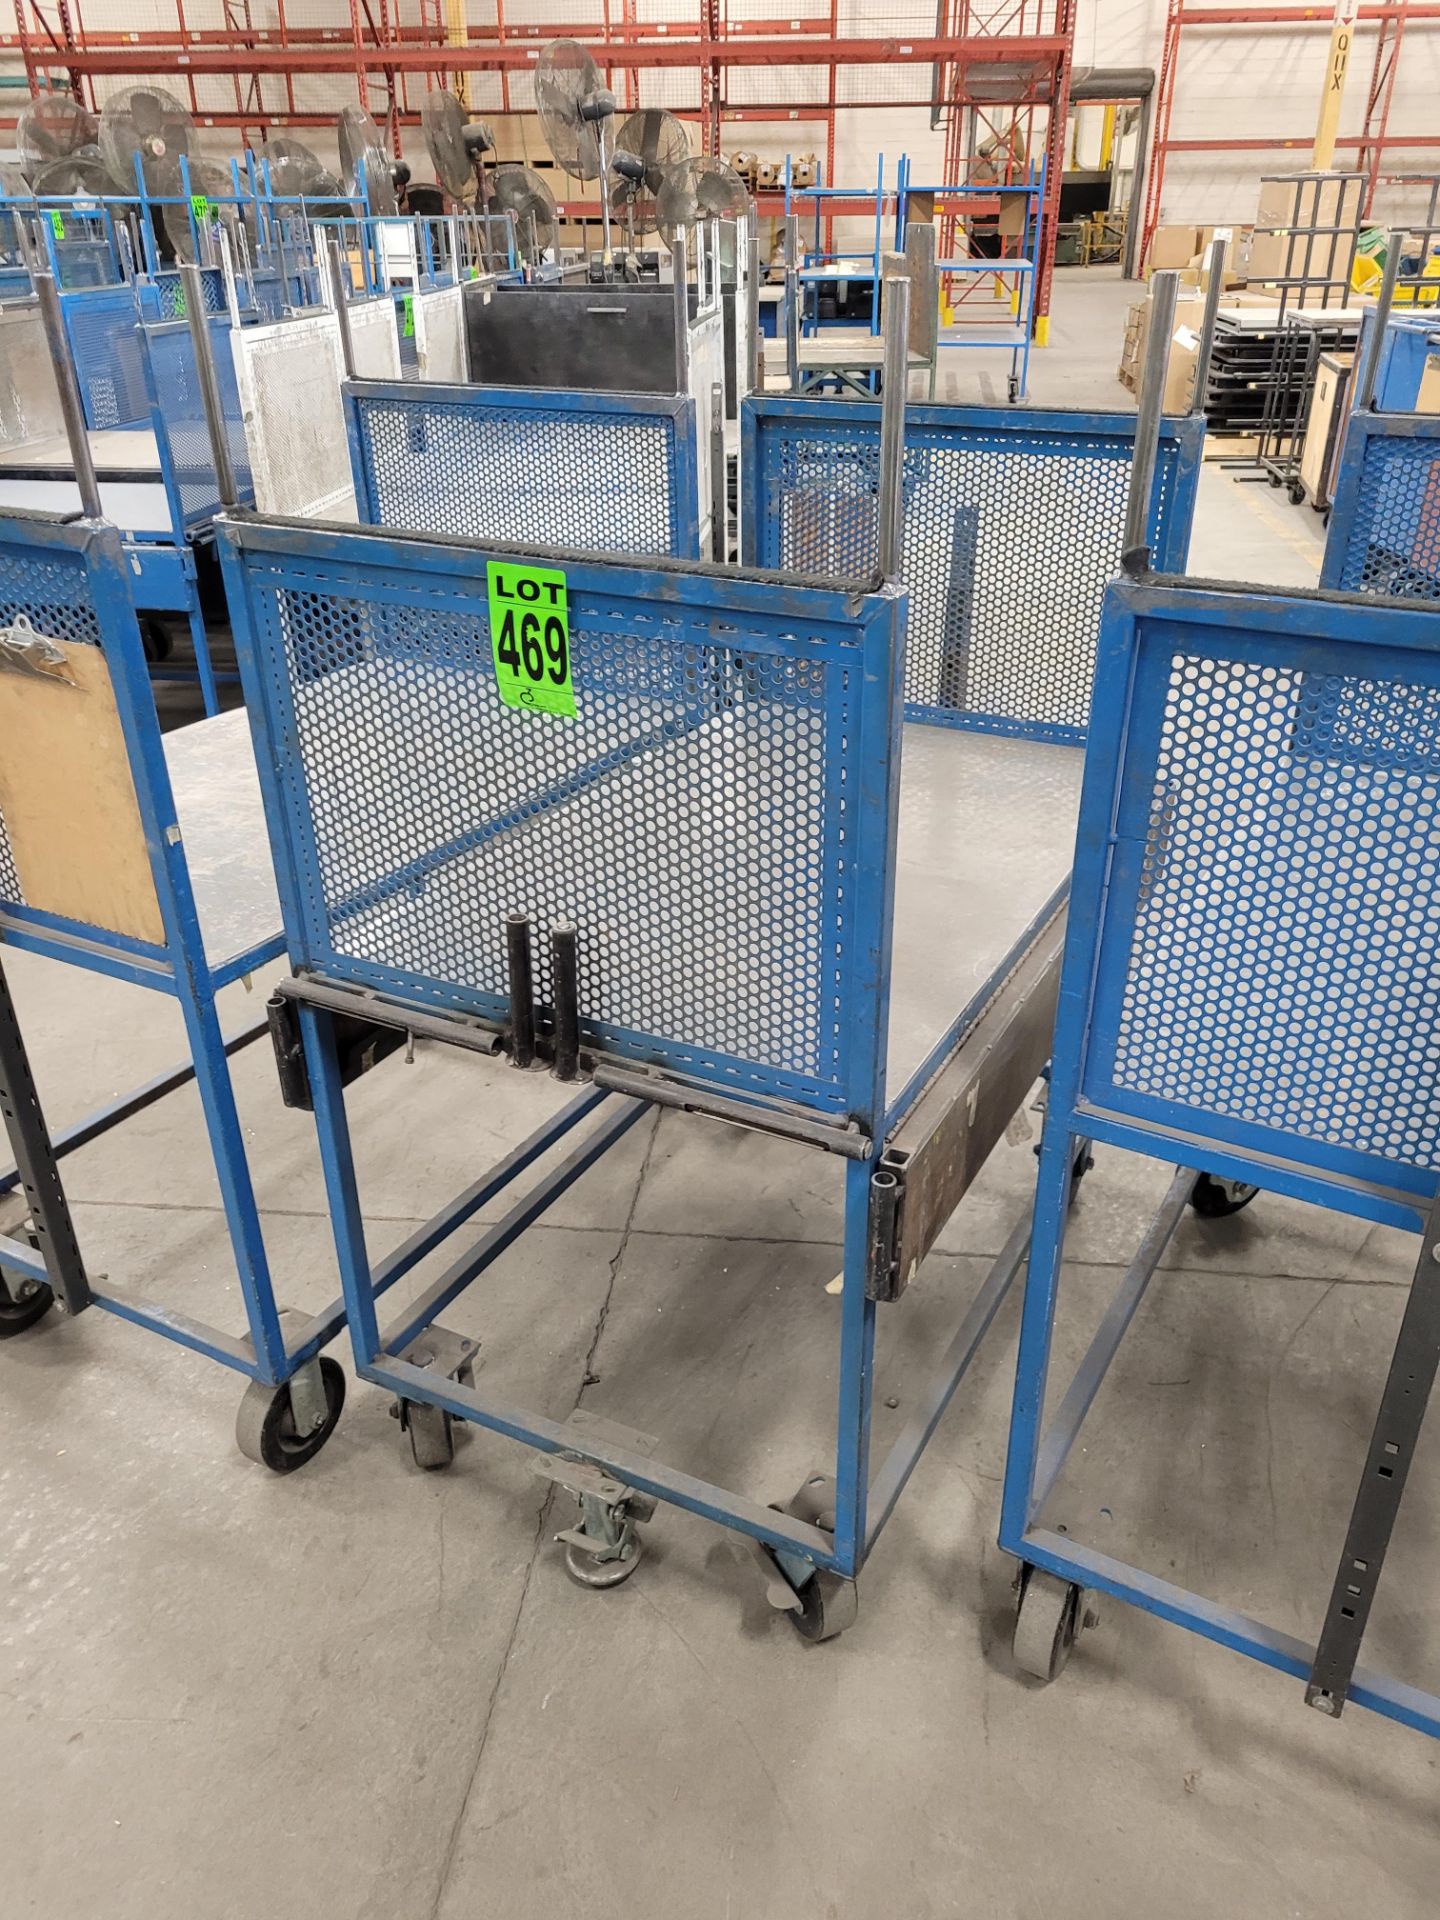 Lot of (3) steel-lattice carts w/handles, casters, wheel lock, (1) w/ expandable sides and floor loc - Image 3 of 5